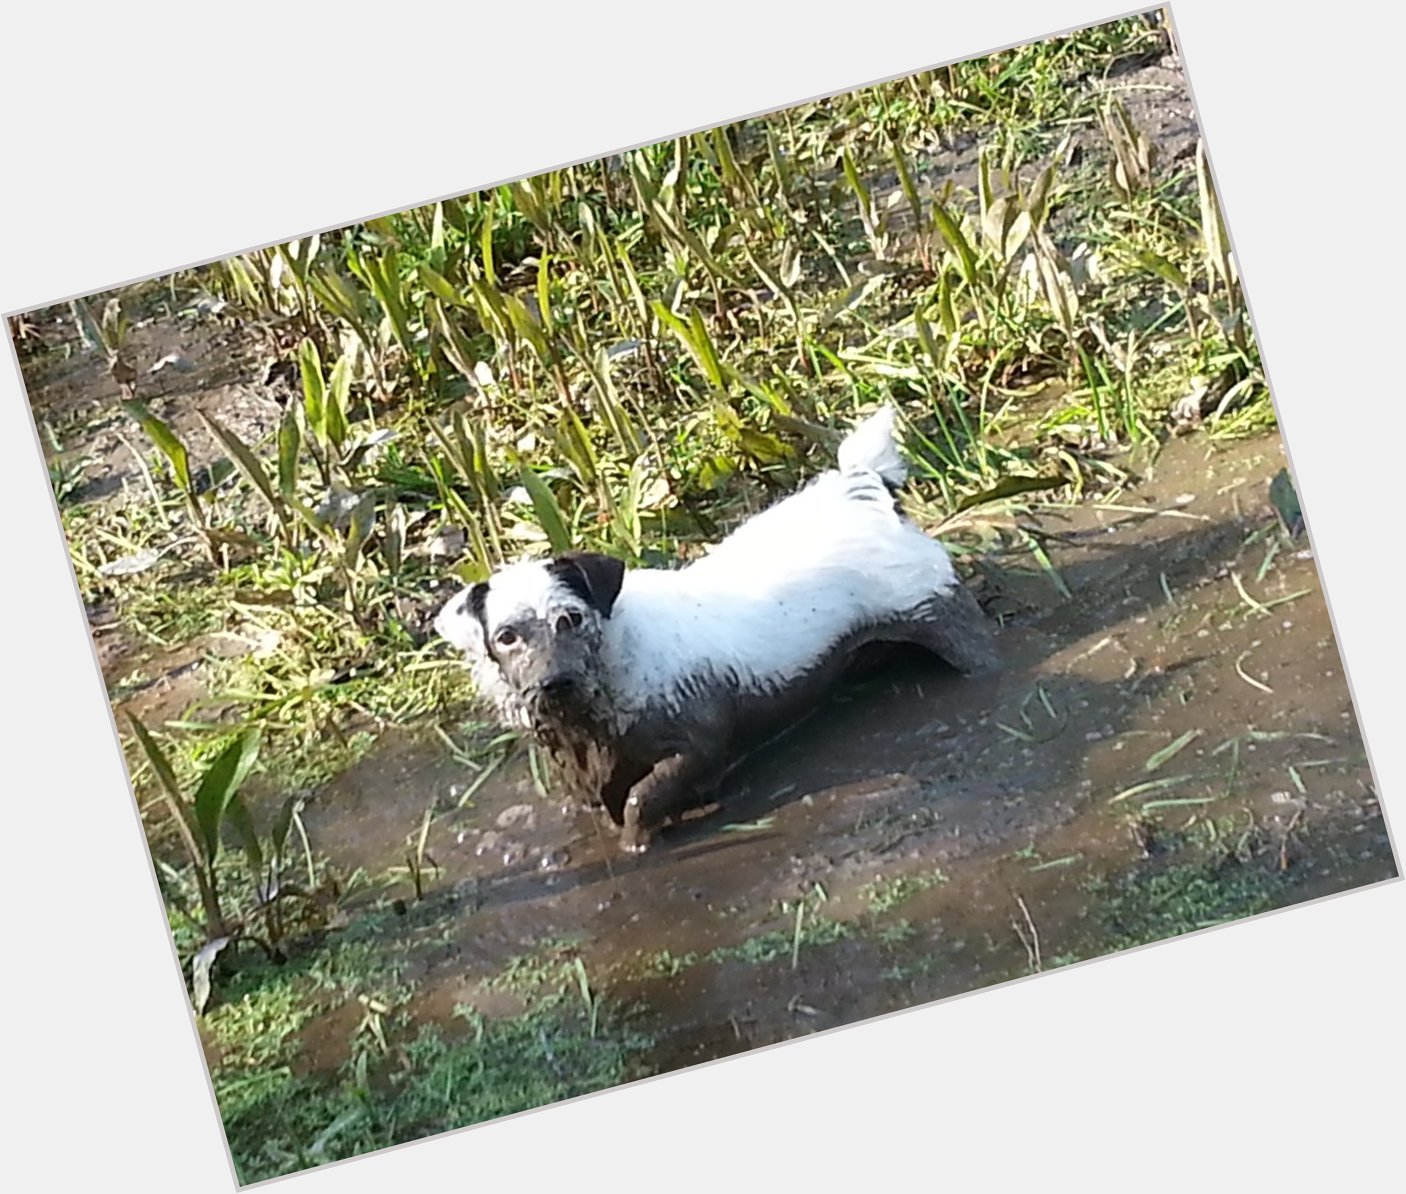  Happy Birthday Corry. This is Mac, my Parsons Jack Russell - as you can see he\s rather fond of mud! 